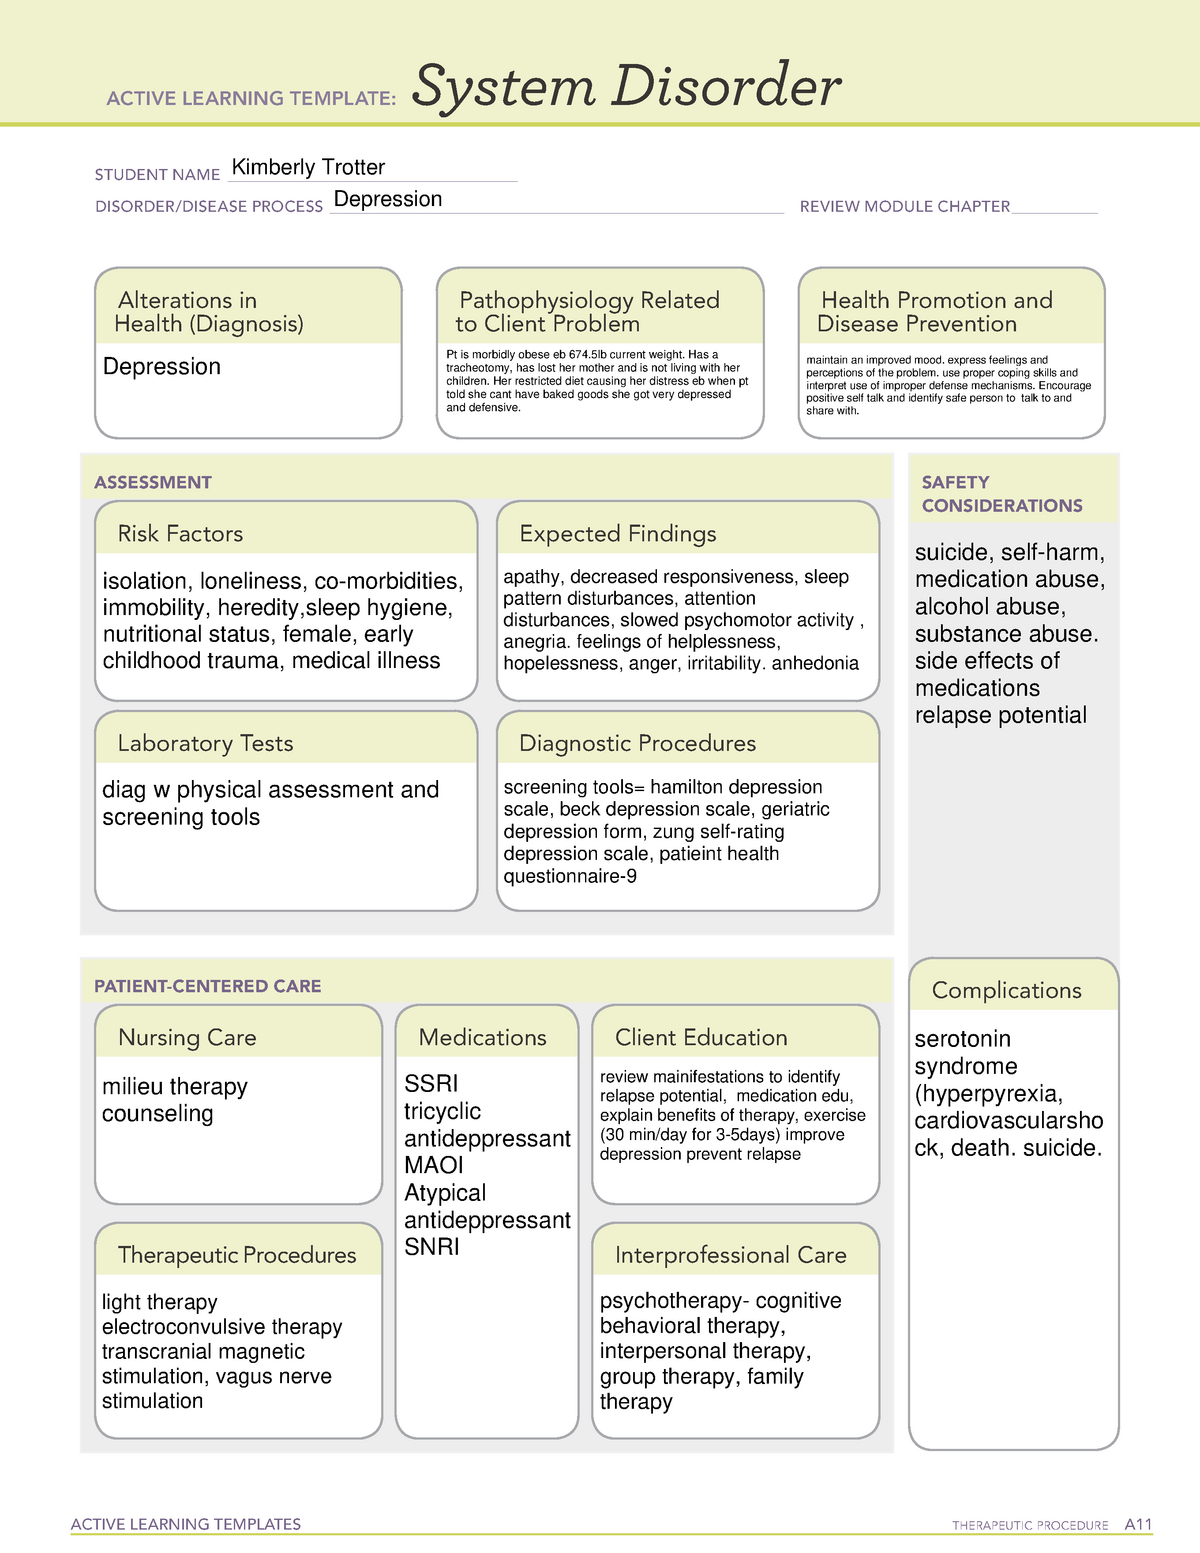 System disorder form.pdf depression ACTIVE LEARNING TEMPLATES